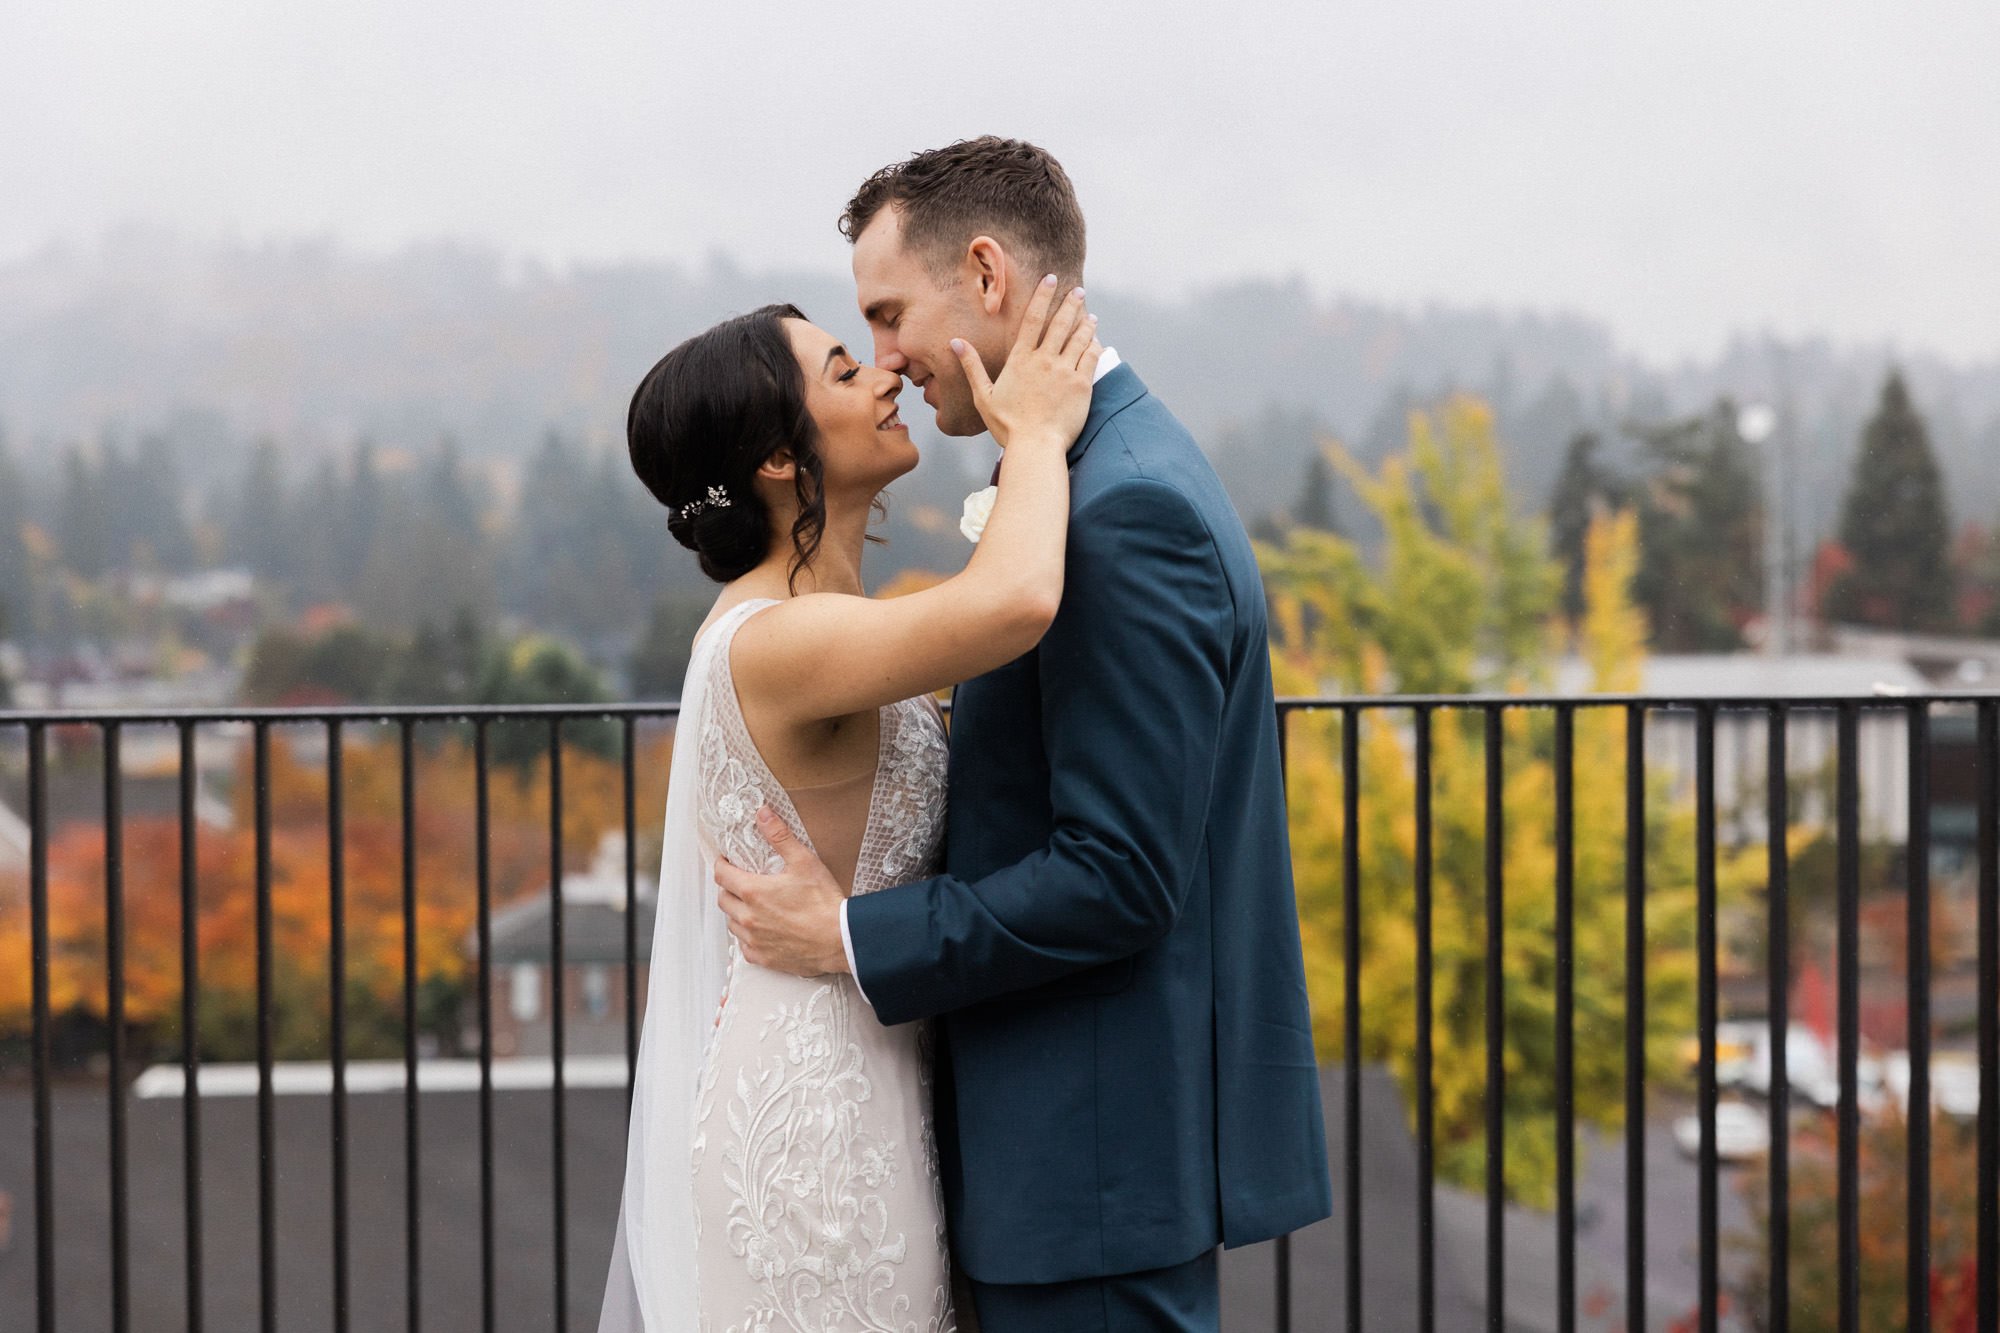 bride and groom embrace each other on balcony at ironlight wedding venue in lake oswego, oregon